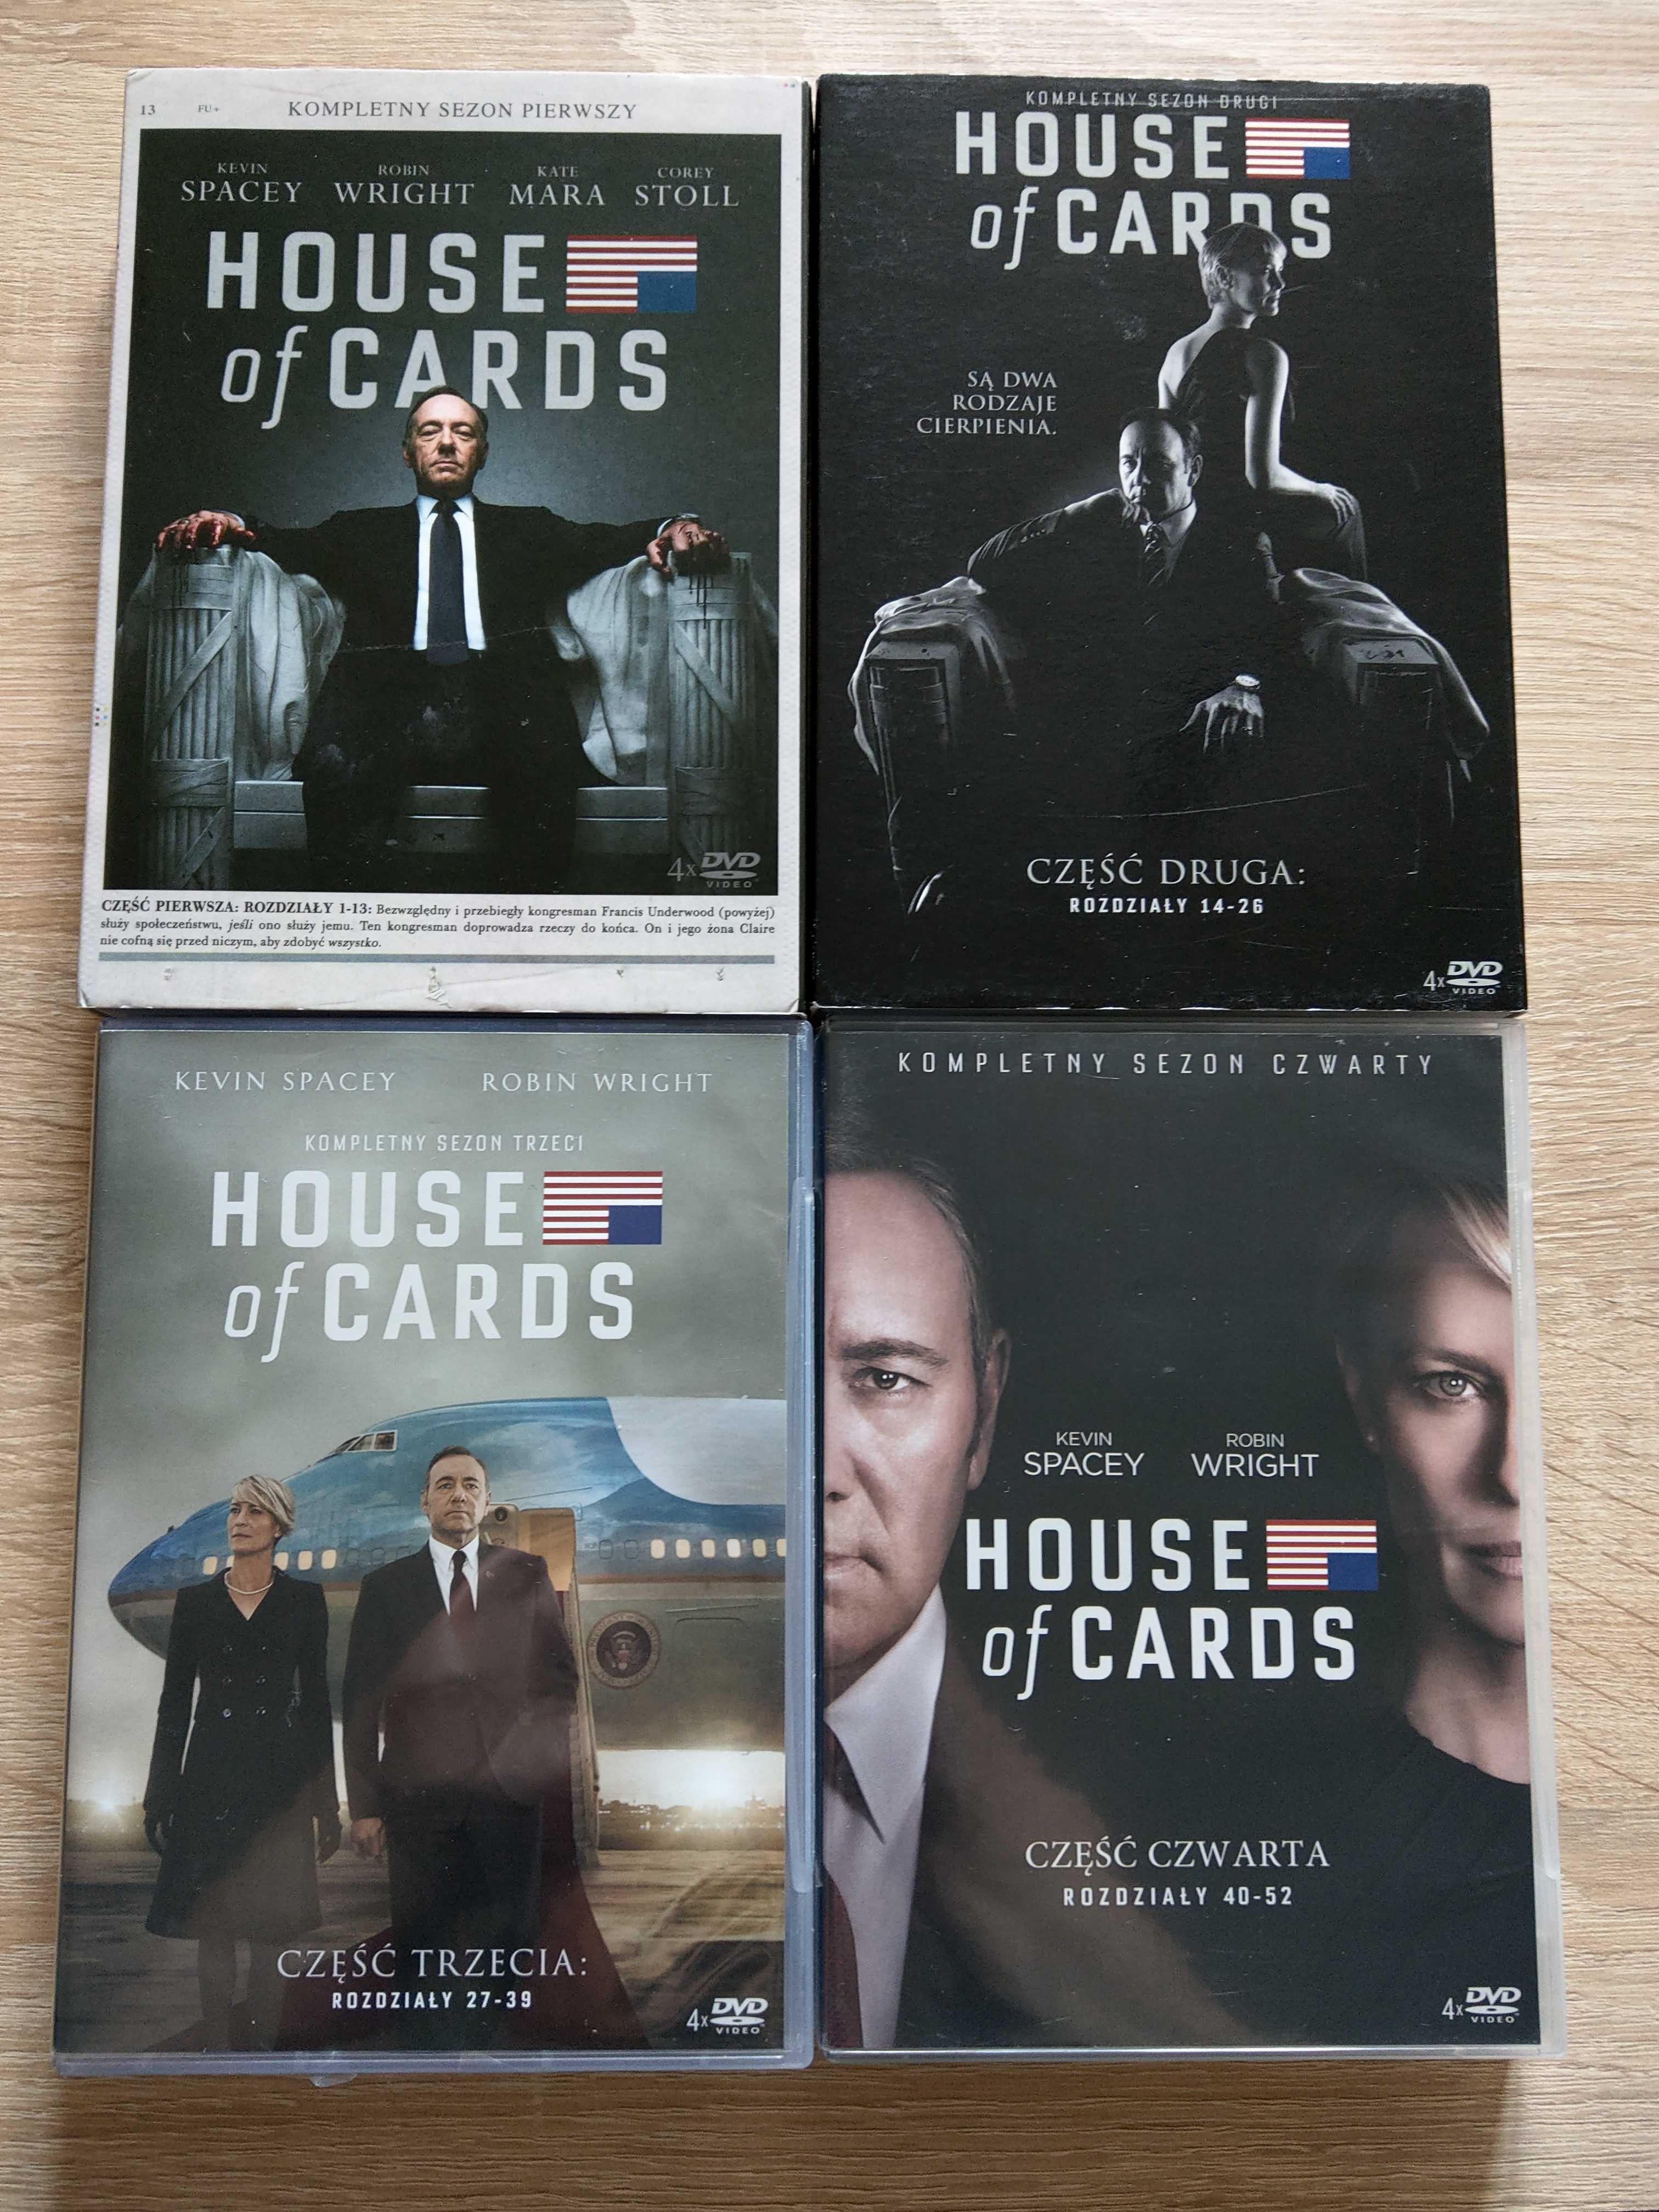 HOUSE OF CARDS Komplet IV sezony, po 13 odcinków. K. Spacey  R. Wright